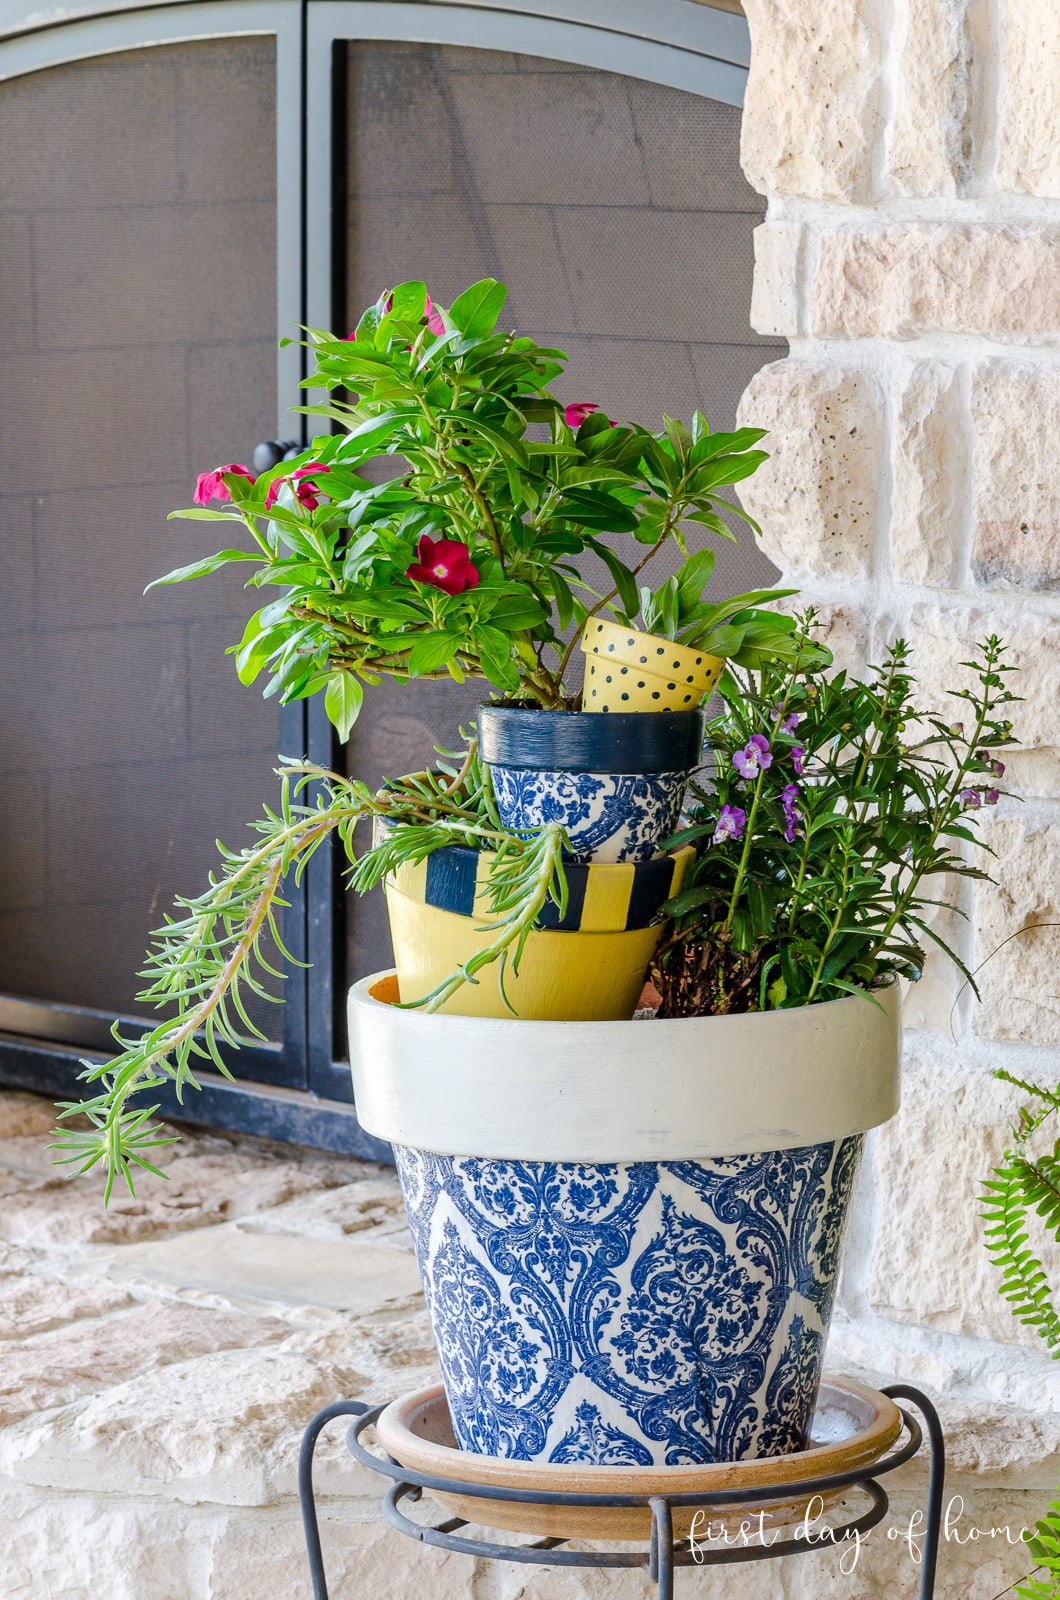 Decoupage stacked flower pots on plant stand by outdoor fireplace.